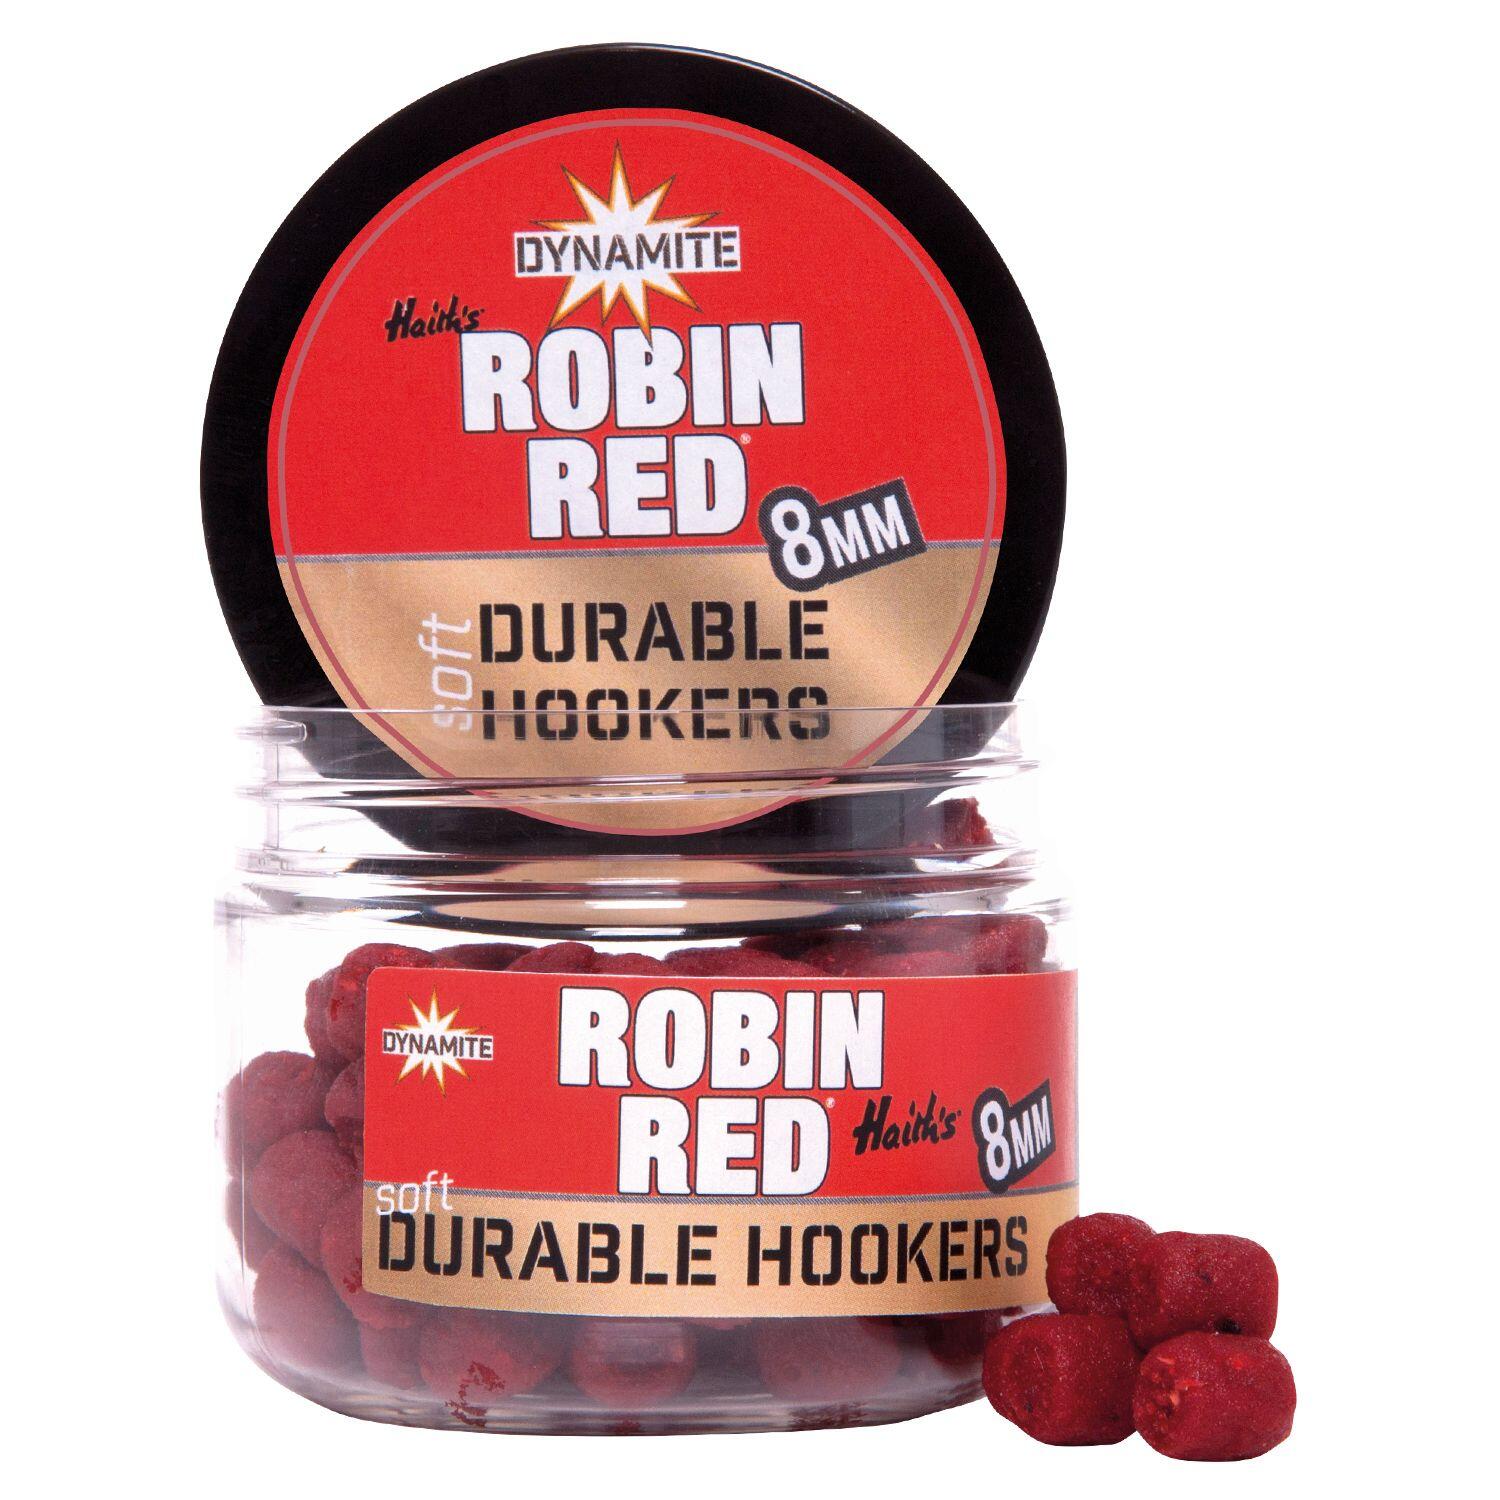 dynamite_robin_red_durable_hookers_dy1449_8mm_fishermania